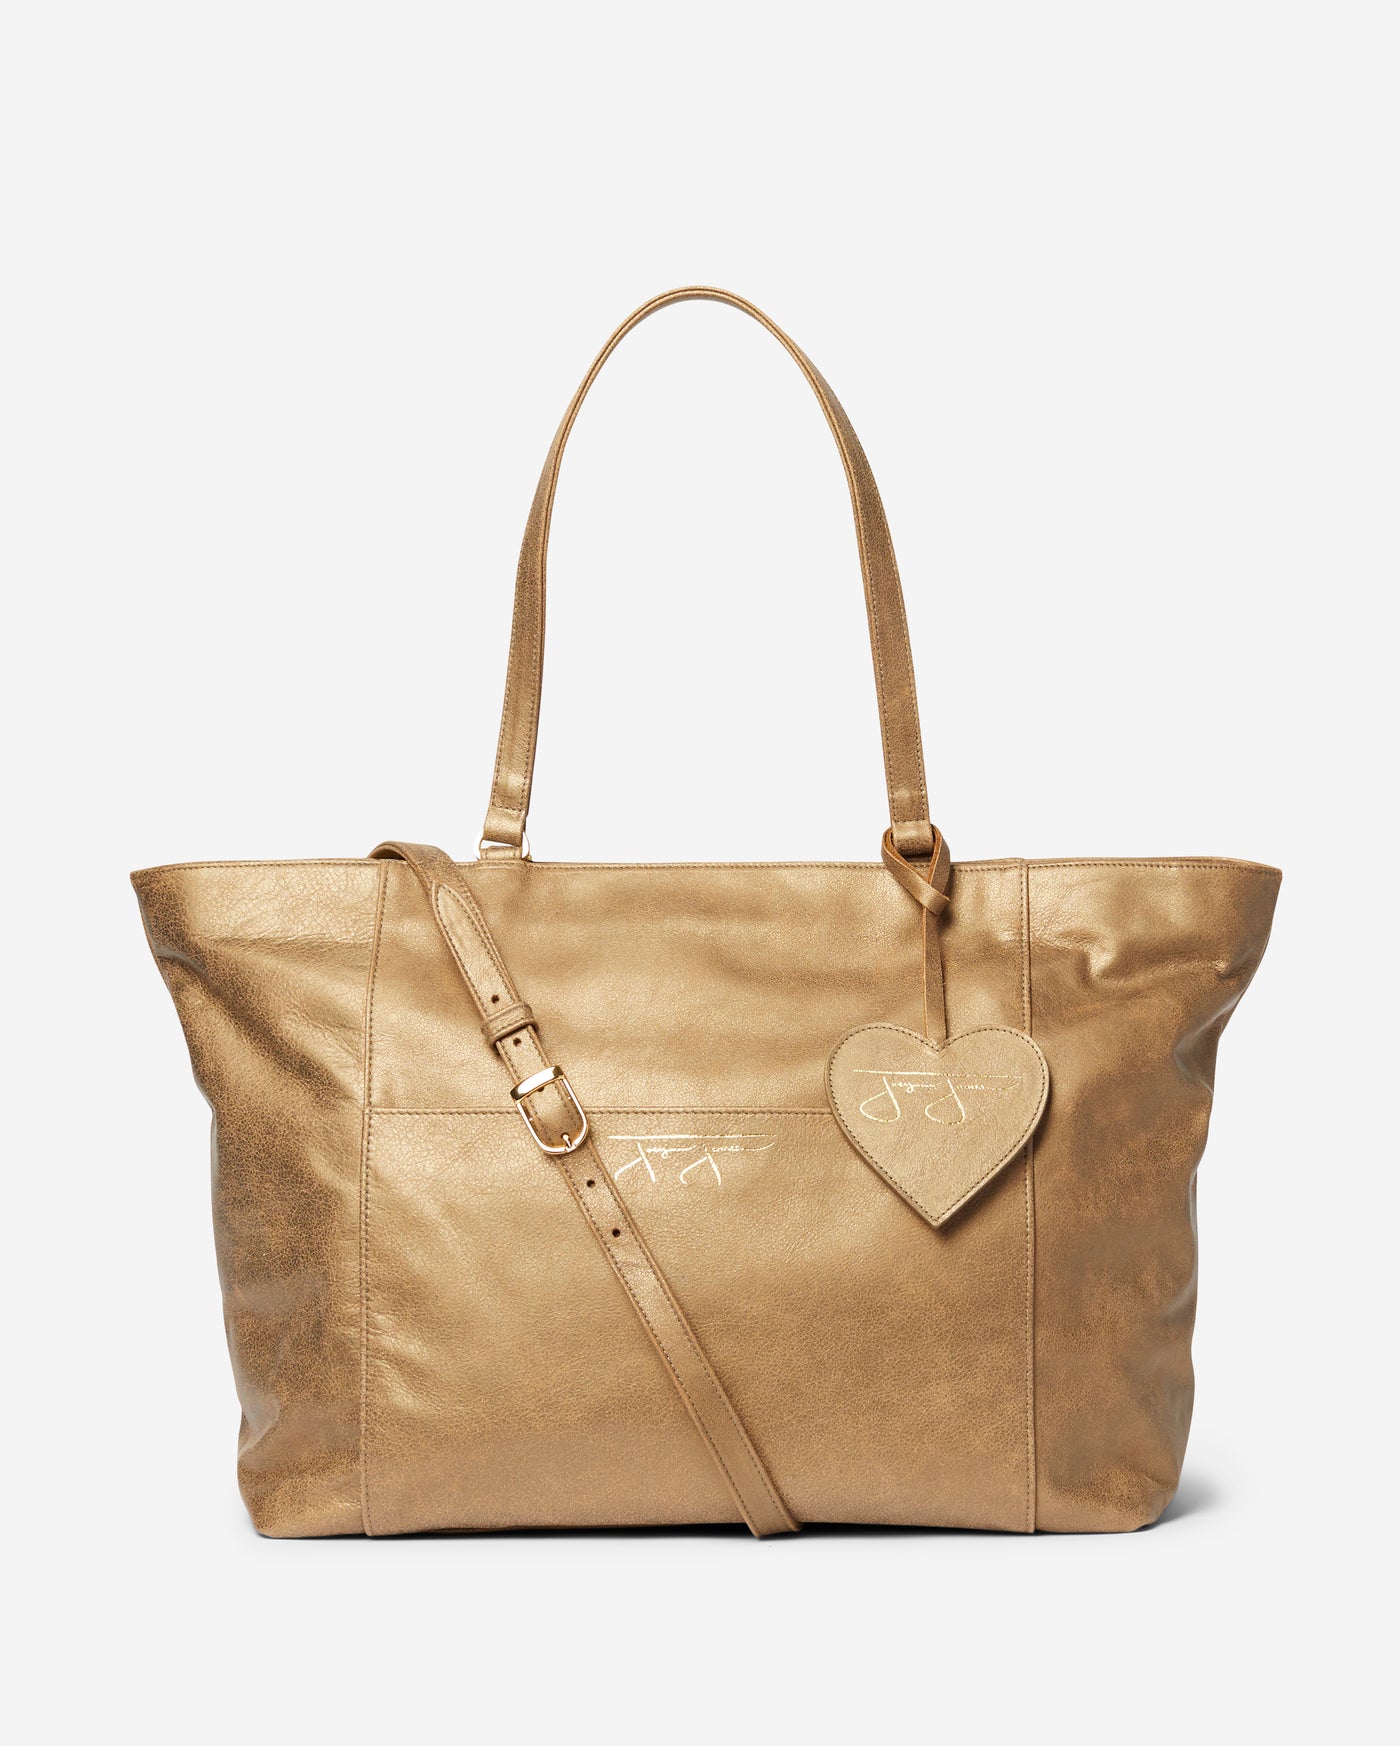 Samantha Tote - Gold  Joey James, The Label   